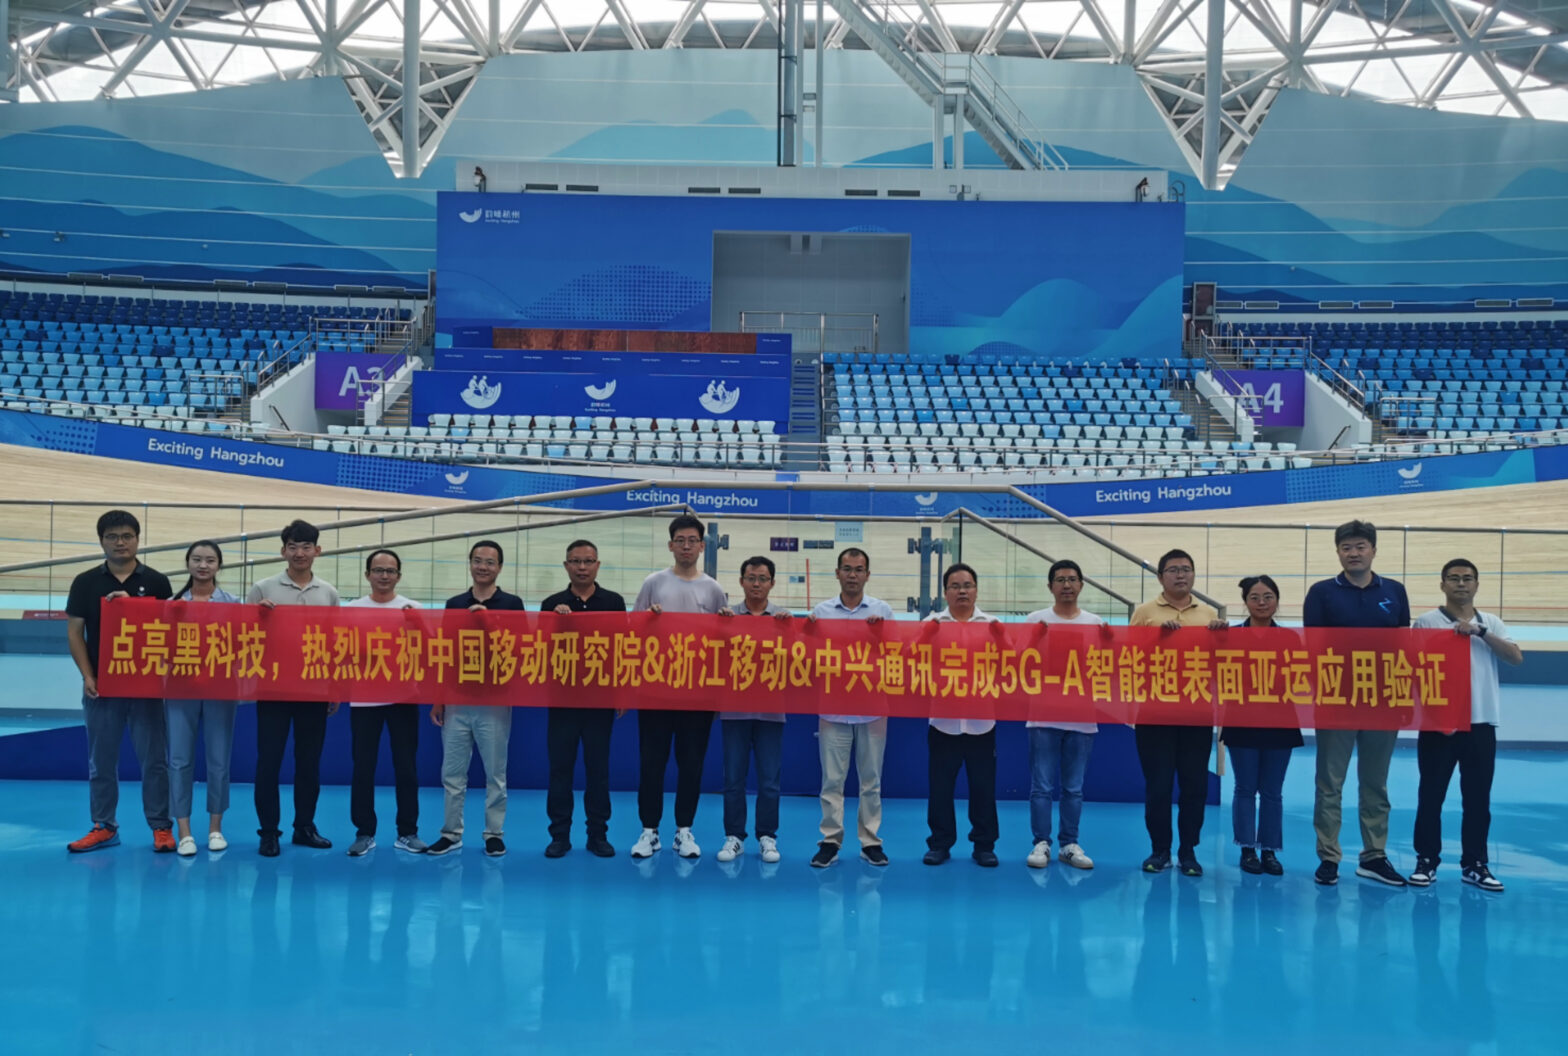 China Mobile and ZTE successfully complete application verification of 5G-A Reconfigurable Intelligent Surface (RIS) for Asian Games